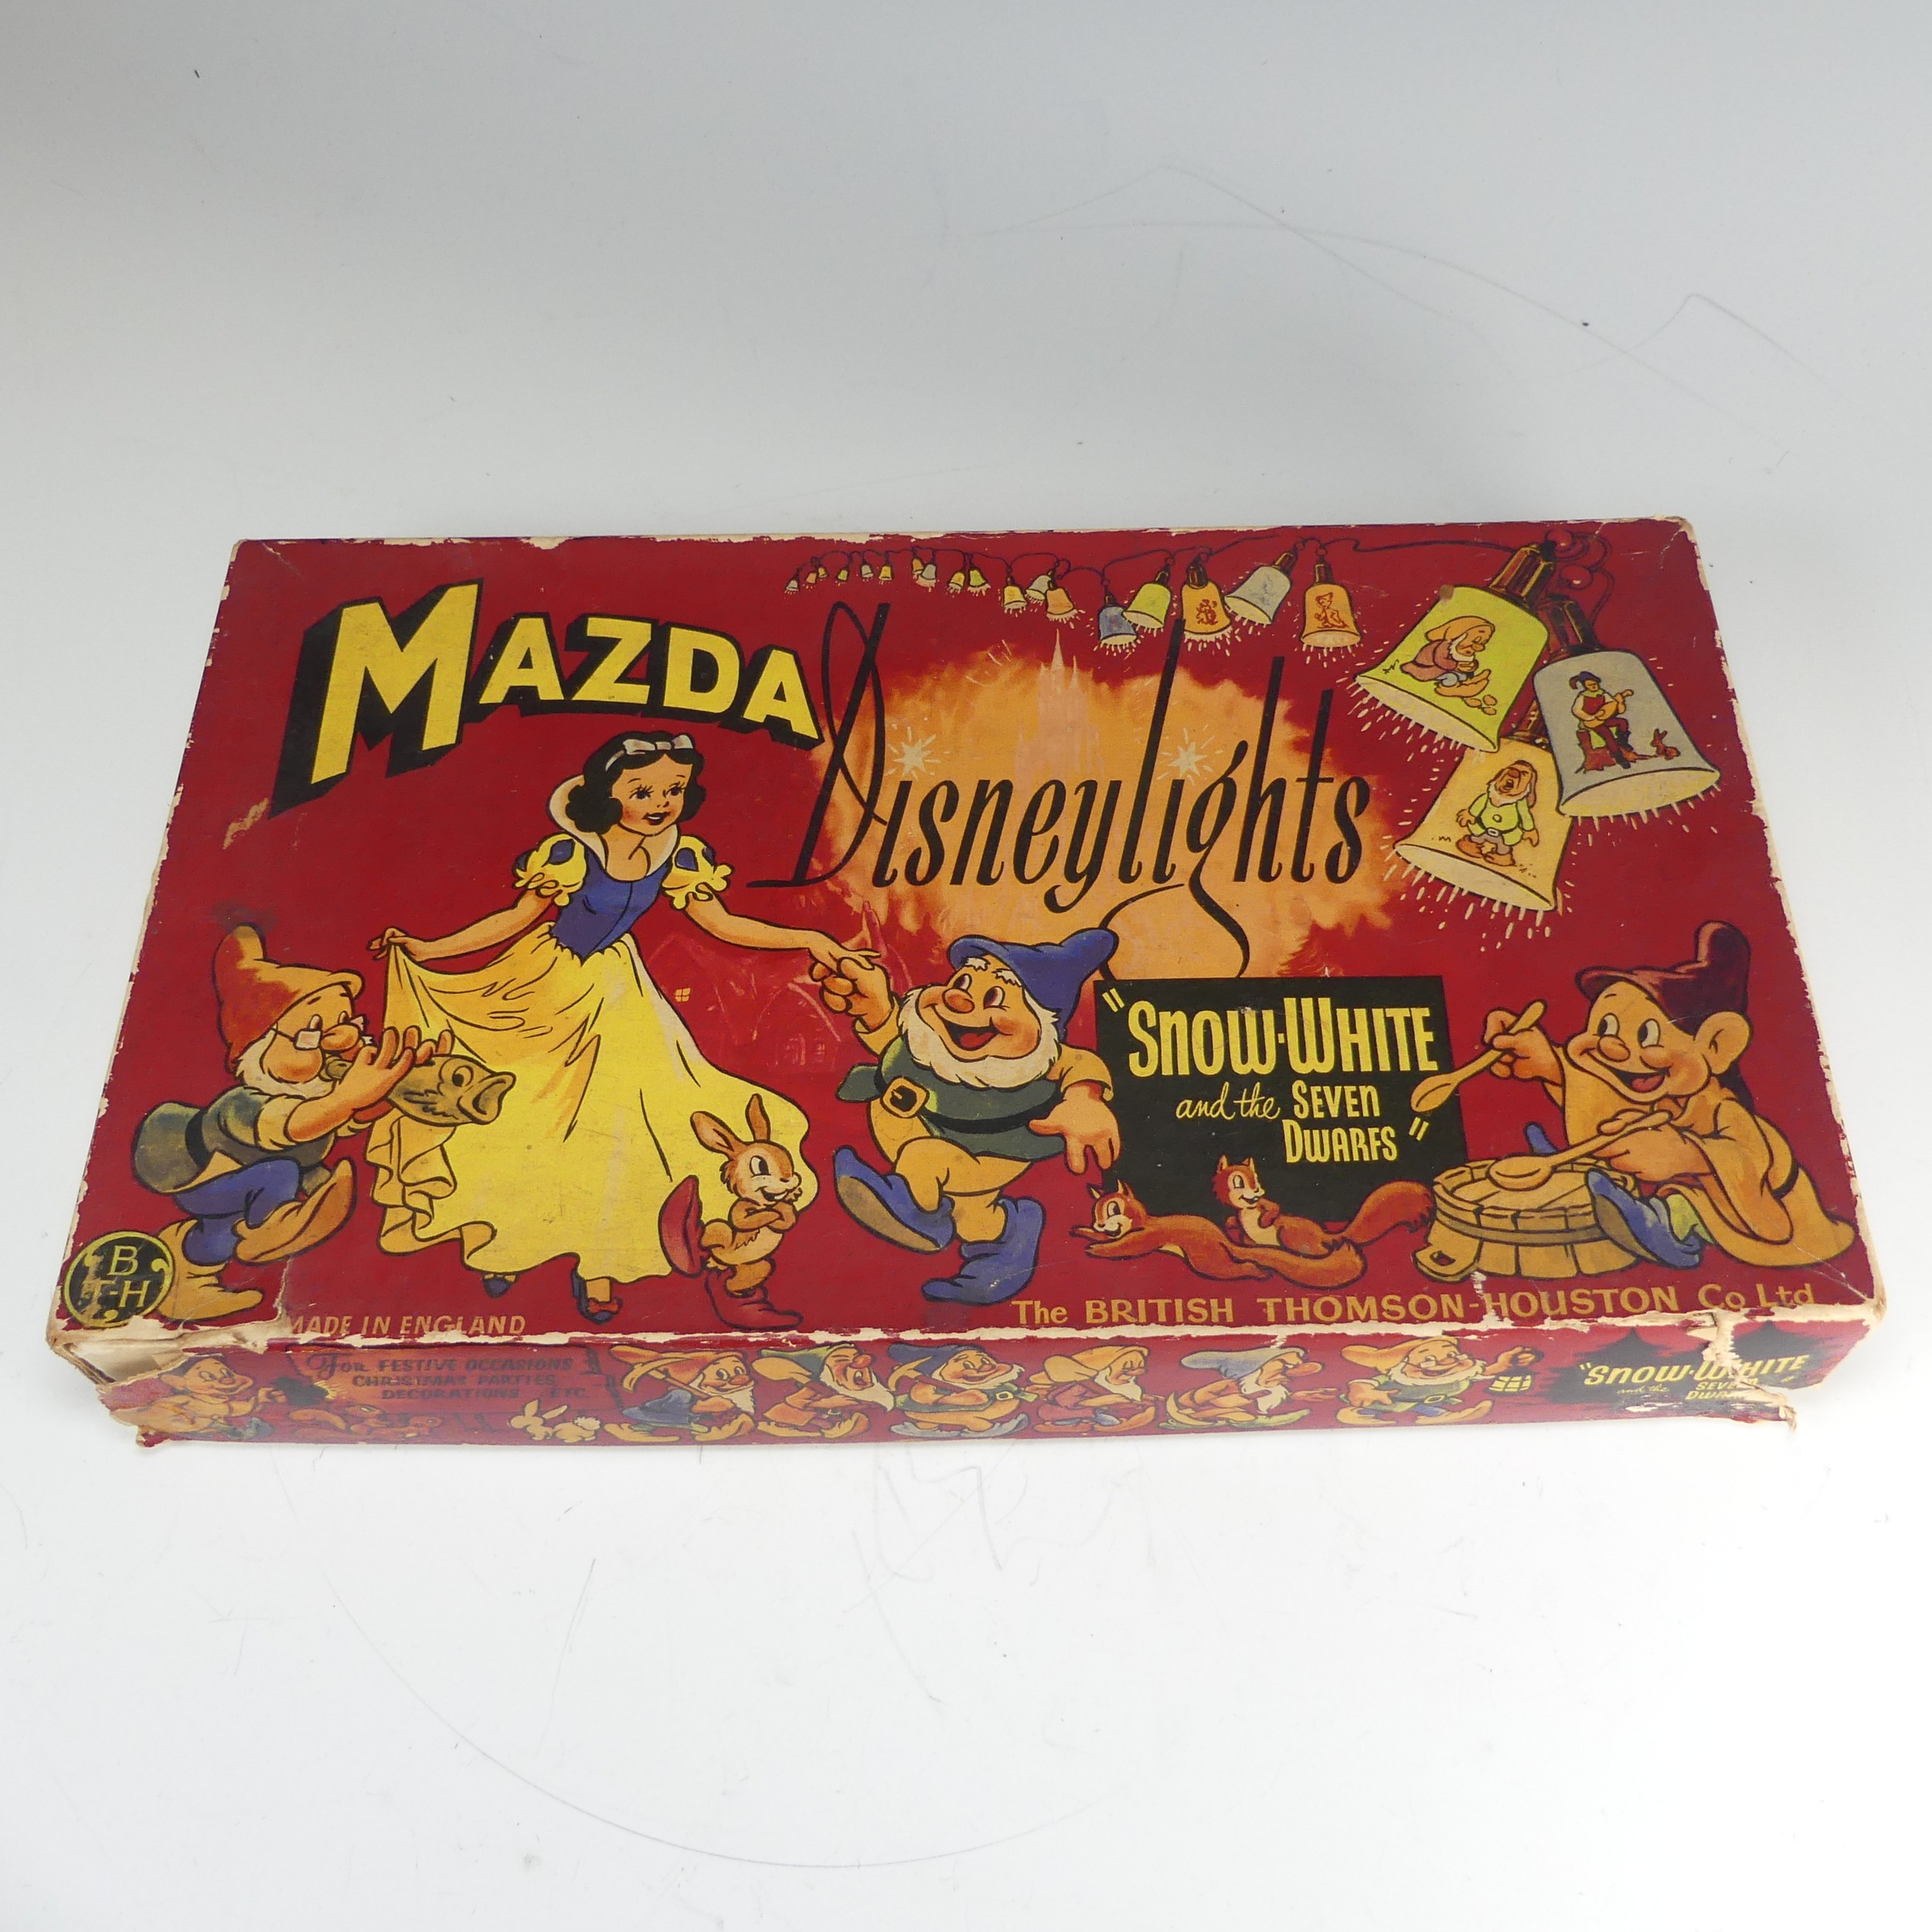 A boxed set of vintage c.1950's Mazda Disney lights, "Snow White and the Seven Dwarfs", in